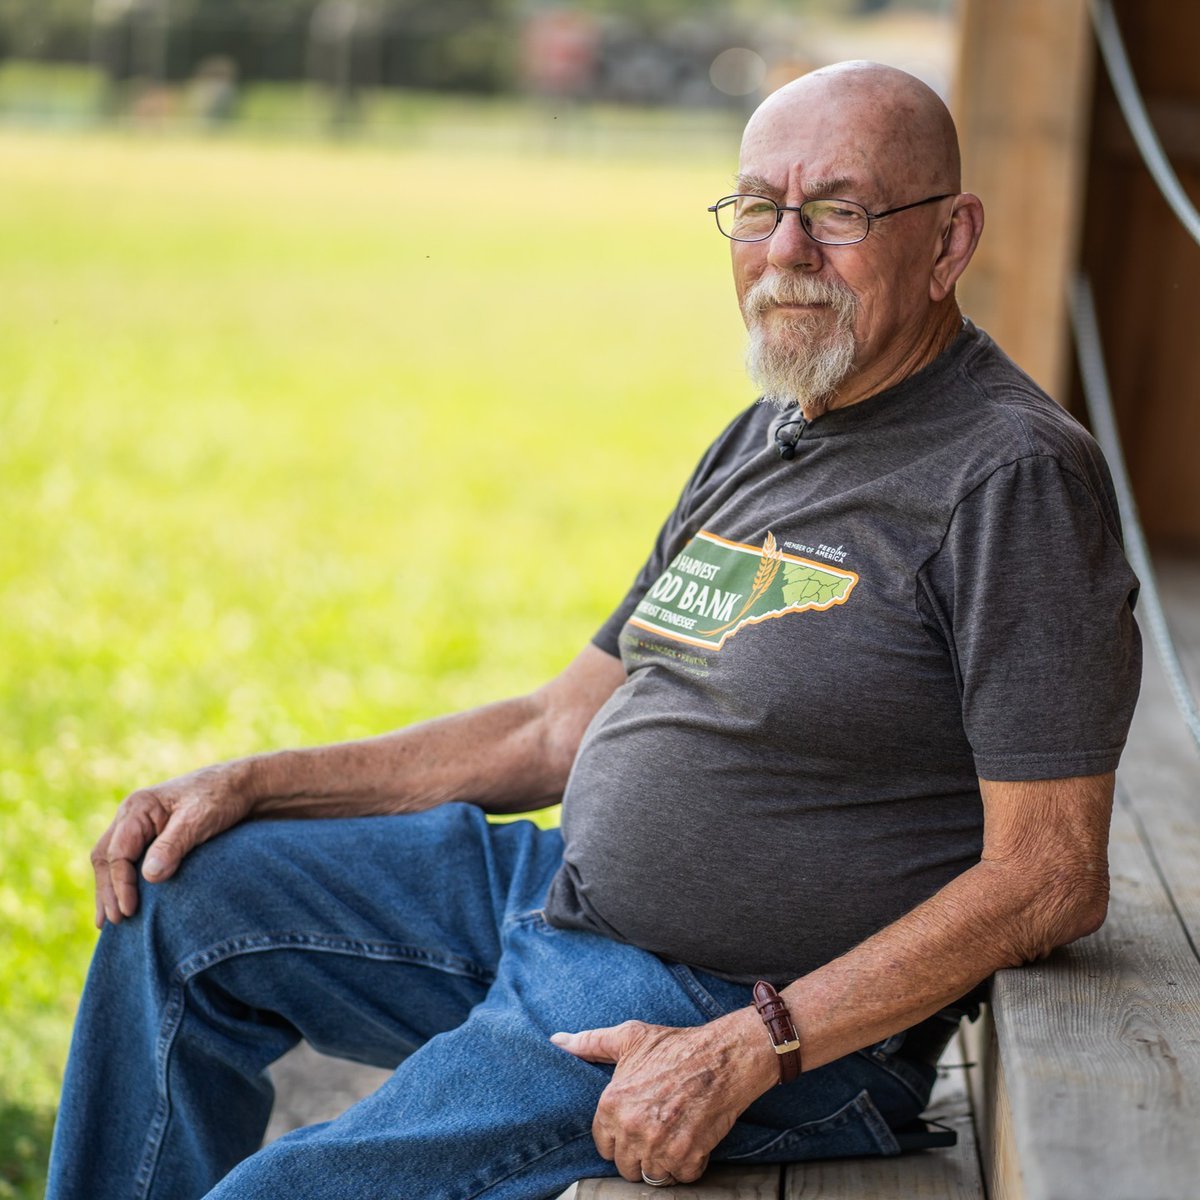 'Well, a lot of these kids, the only meals they get is at school, breakfast and lunch. And during the summer we worry about if they get anything at all.” - Willard Malone, Food For Kids Truck Driver 🚛 For more on #summermeals, visit ➡️ bit.ly/4cEgpnc #EndSummerHunger